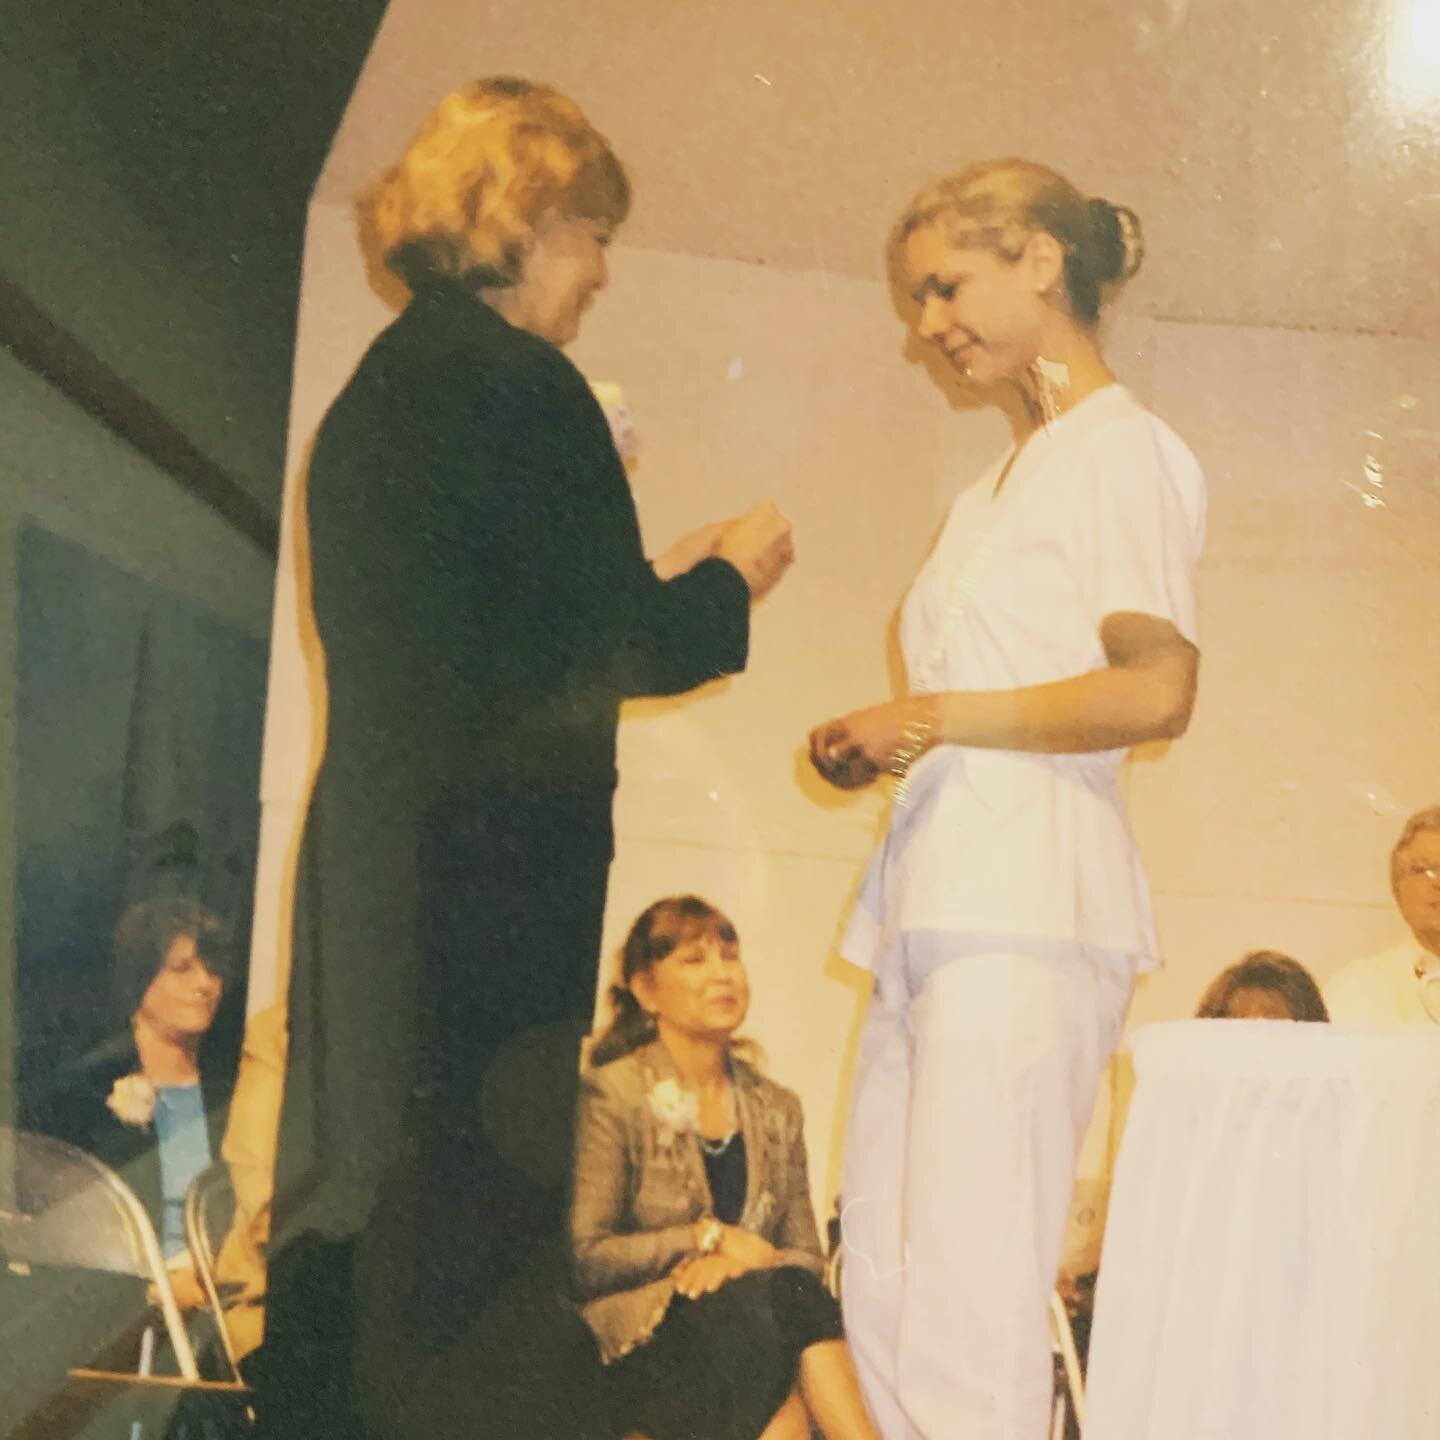 This is the moment that I received my nursing diploma and took part in the candlelit ceremony 🕯🙏

Nursing has been one of the greatest decisions I have ever made. It has allowed me to connect with people all  in the greatest  sense of humanity.💜

